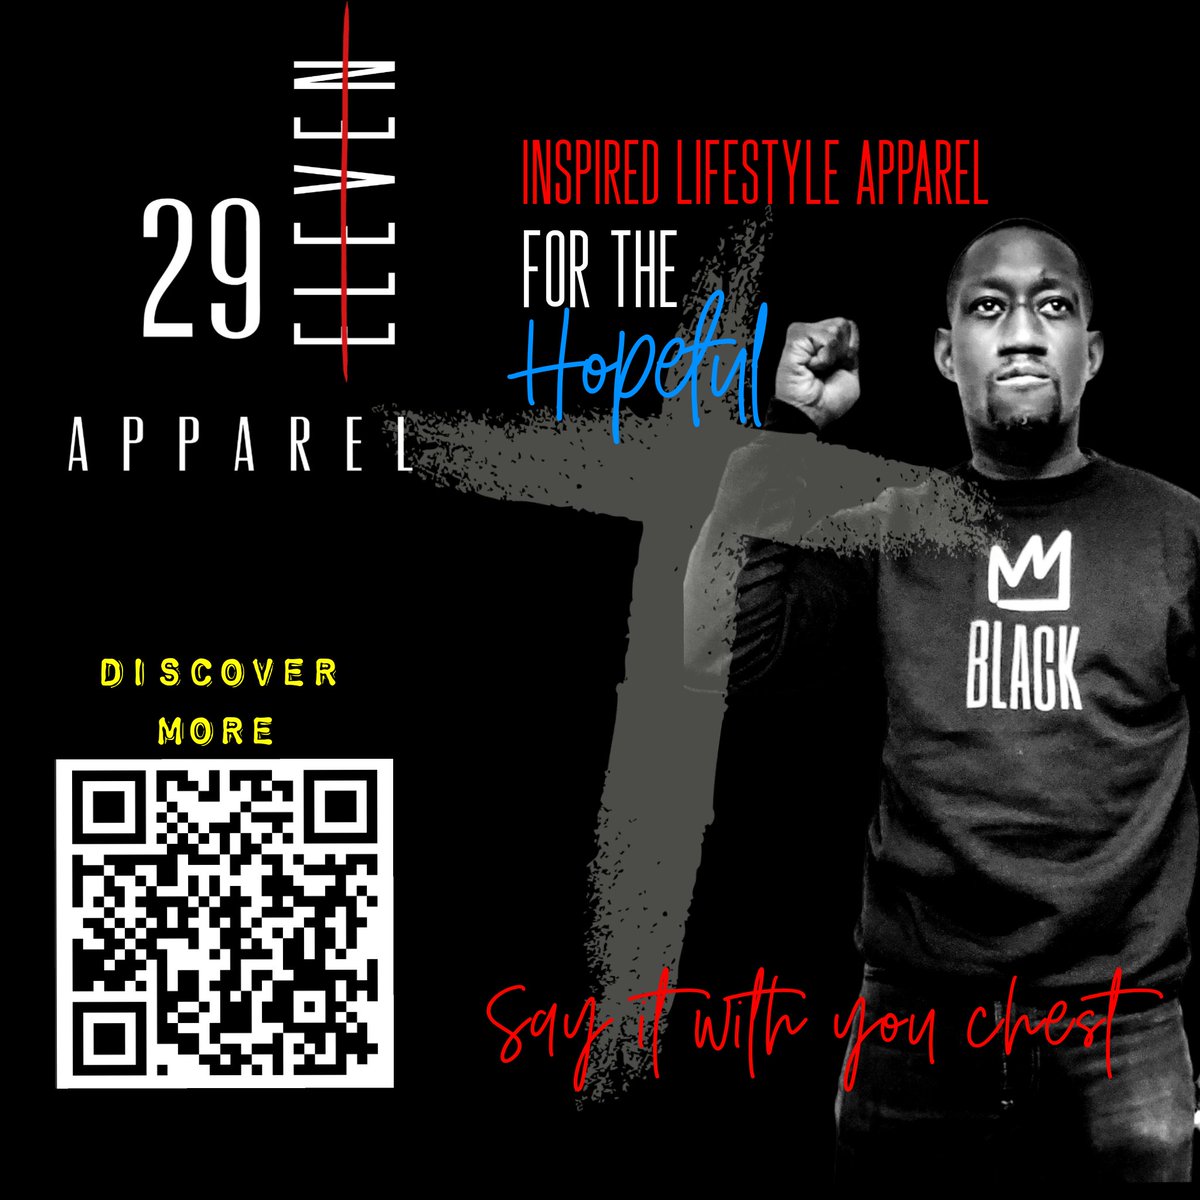 Inspired Lifestyle Apparel 

for the hopeful 
for the victorious 
for the glory
for the battlefield
for the redeemed
FOR YOU

#29eleven 
#inspirationalclothing 
#shopblack 
#shopsmall 
#christianapparel 
#urbanapparel 
#202creates